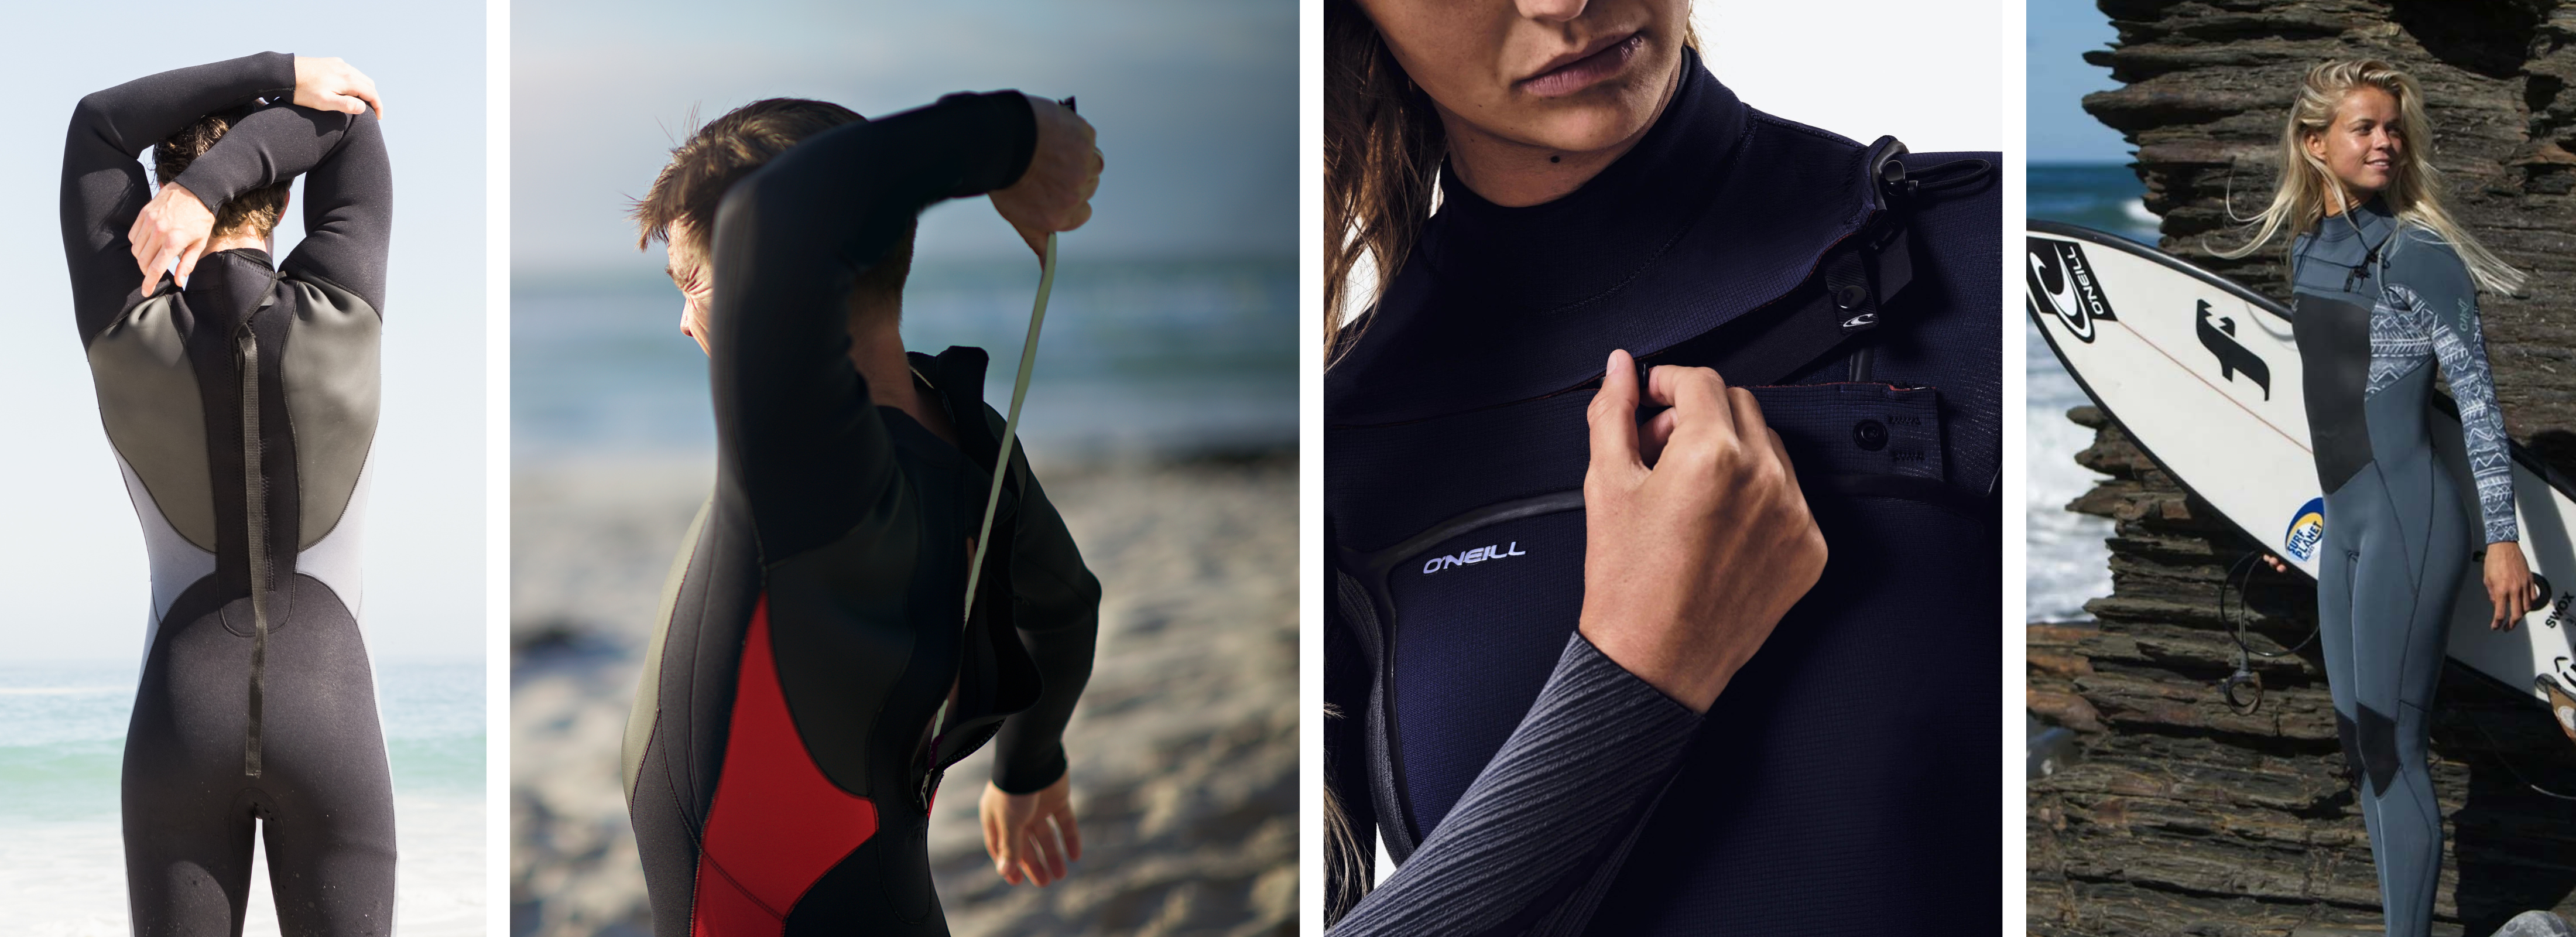 Image showing the different closure styles of wetsuits